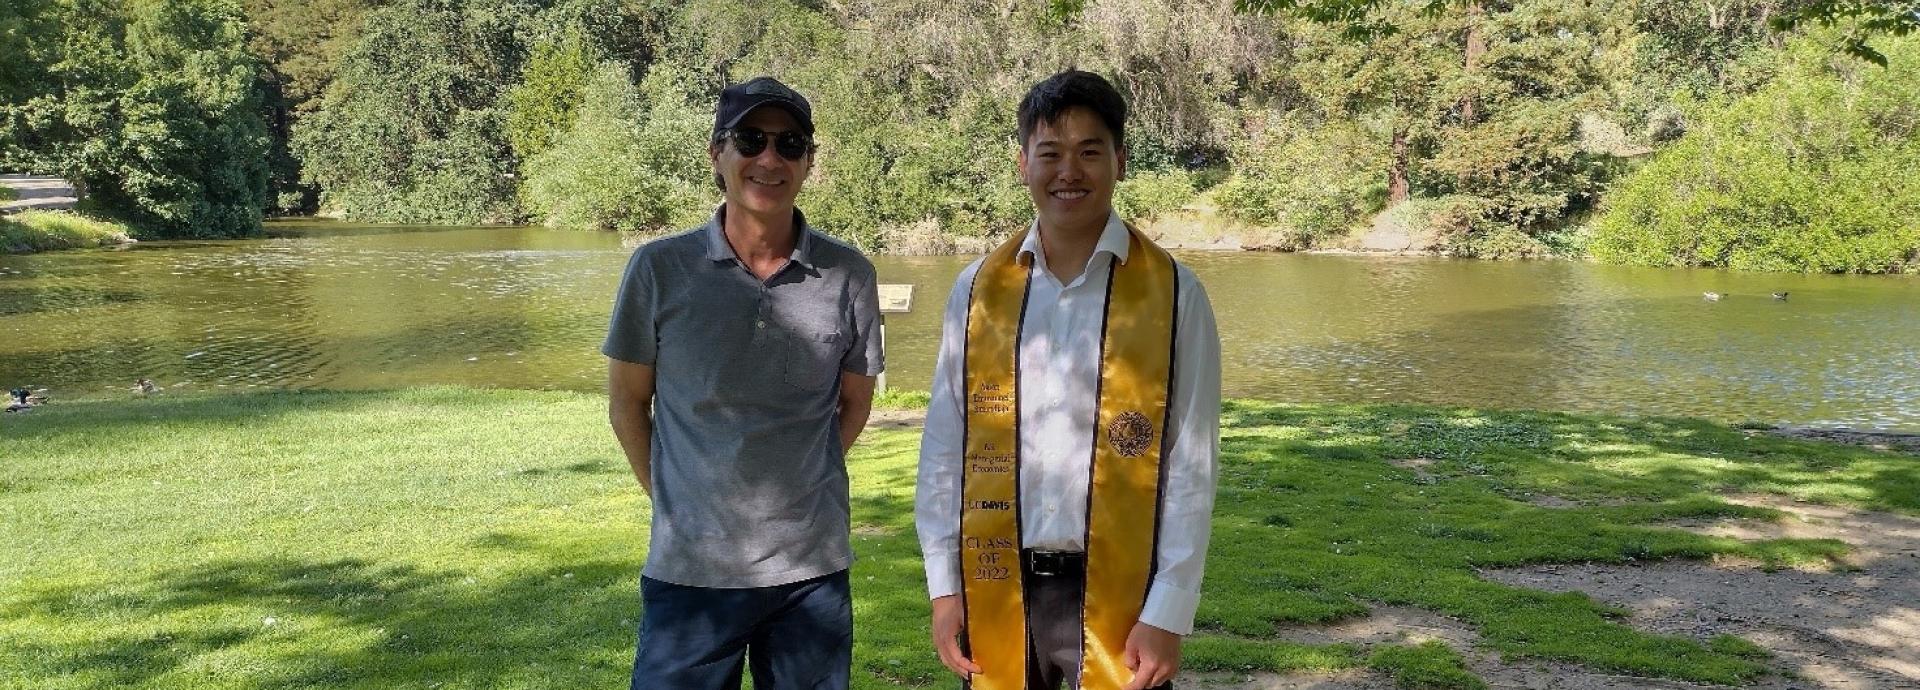 Javier Arévalo with a graduated student standing in front of a lake in a park.